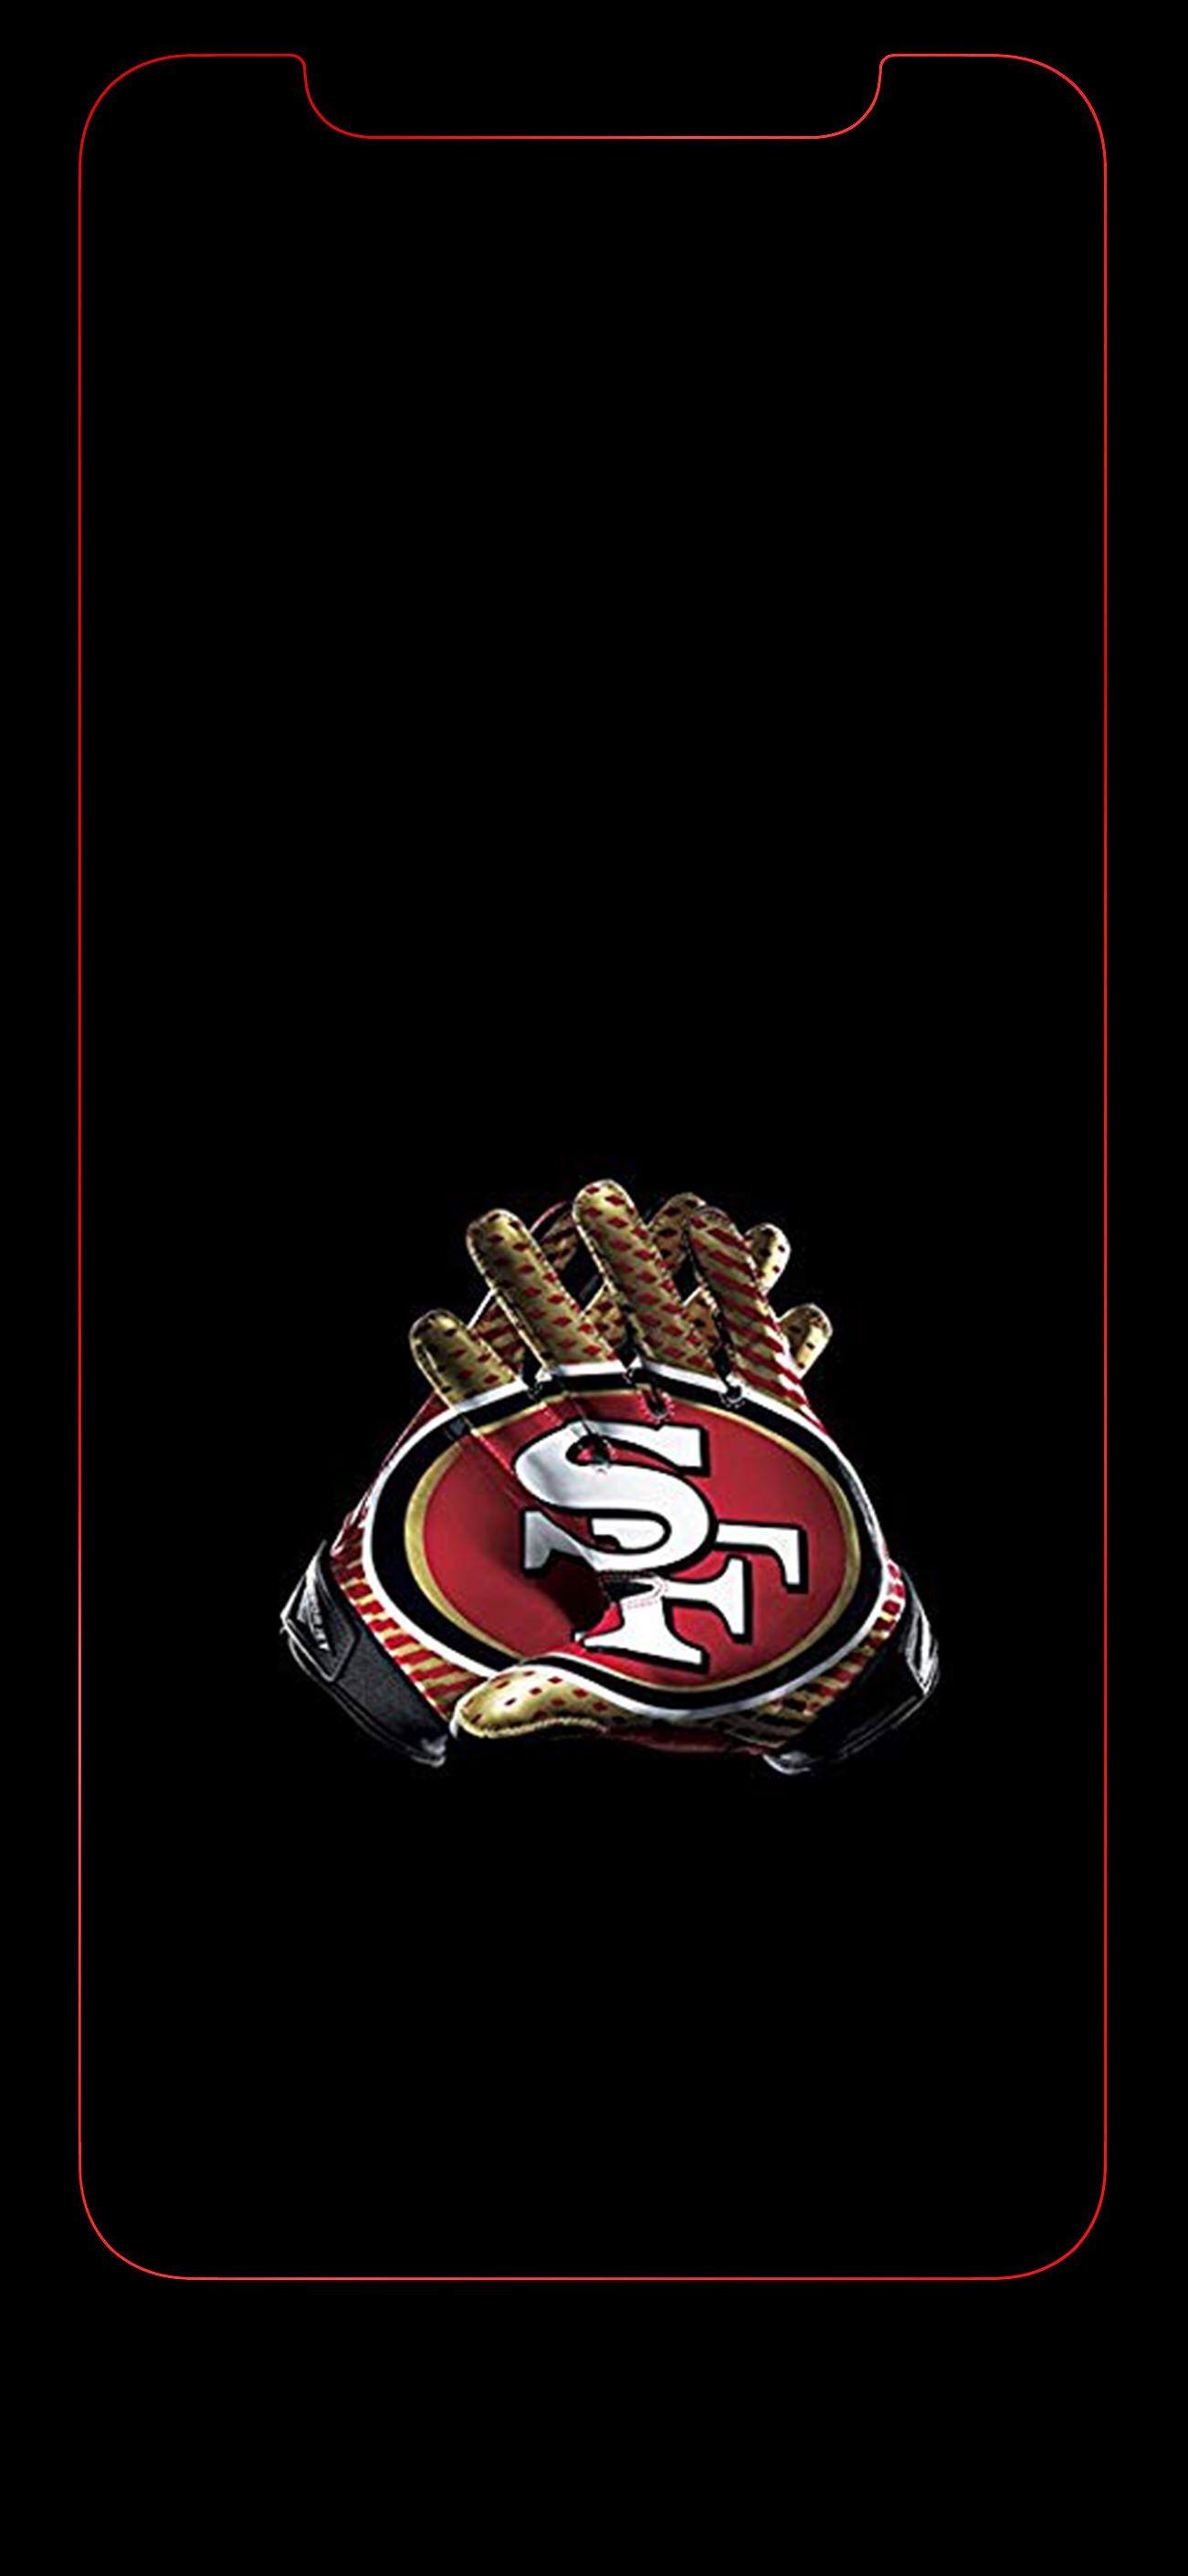 49ers iPhone Wallpapers - Top Free